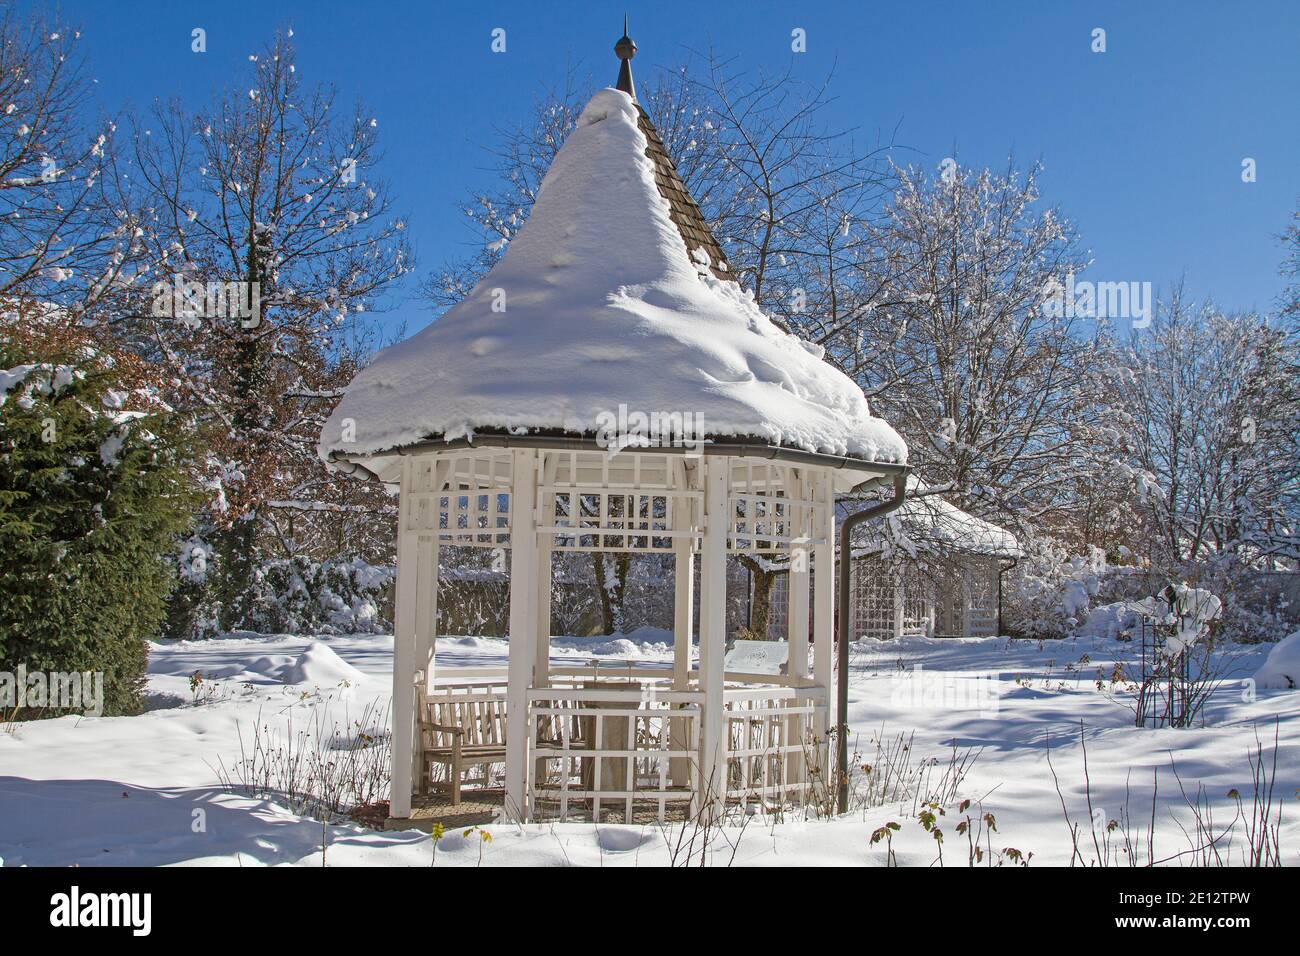 Snow-covered Pavilion In The Spa Park Of Bad Tölz Stock Photo